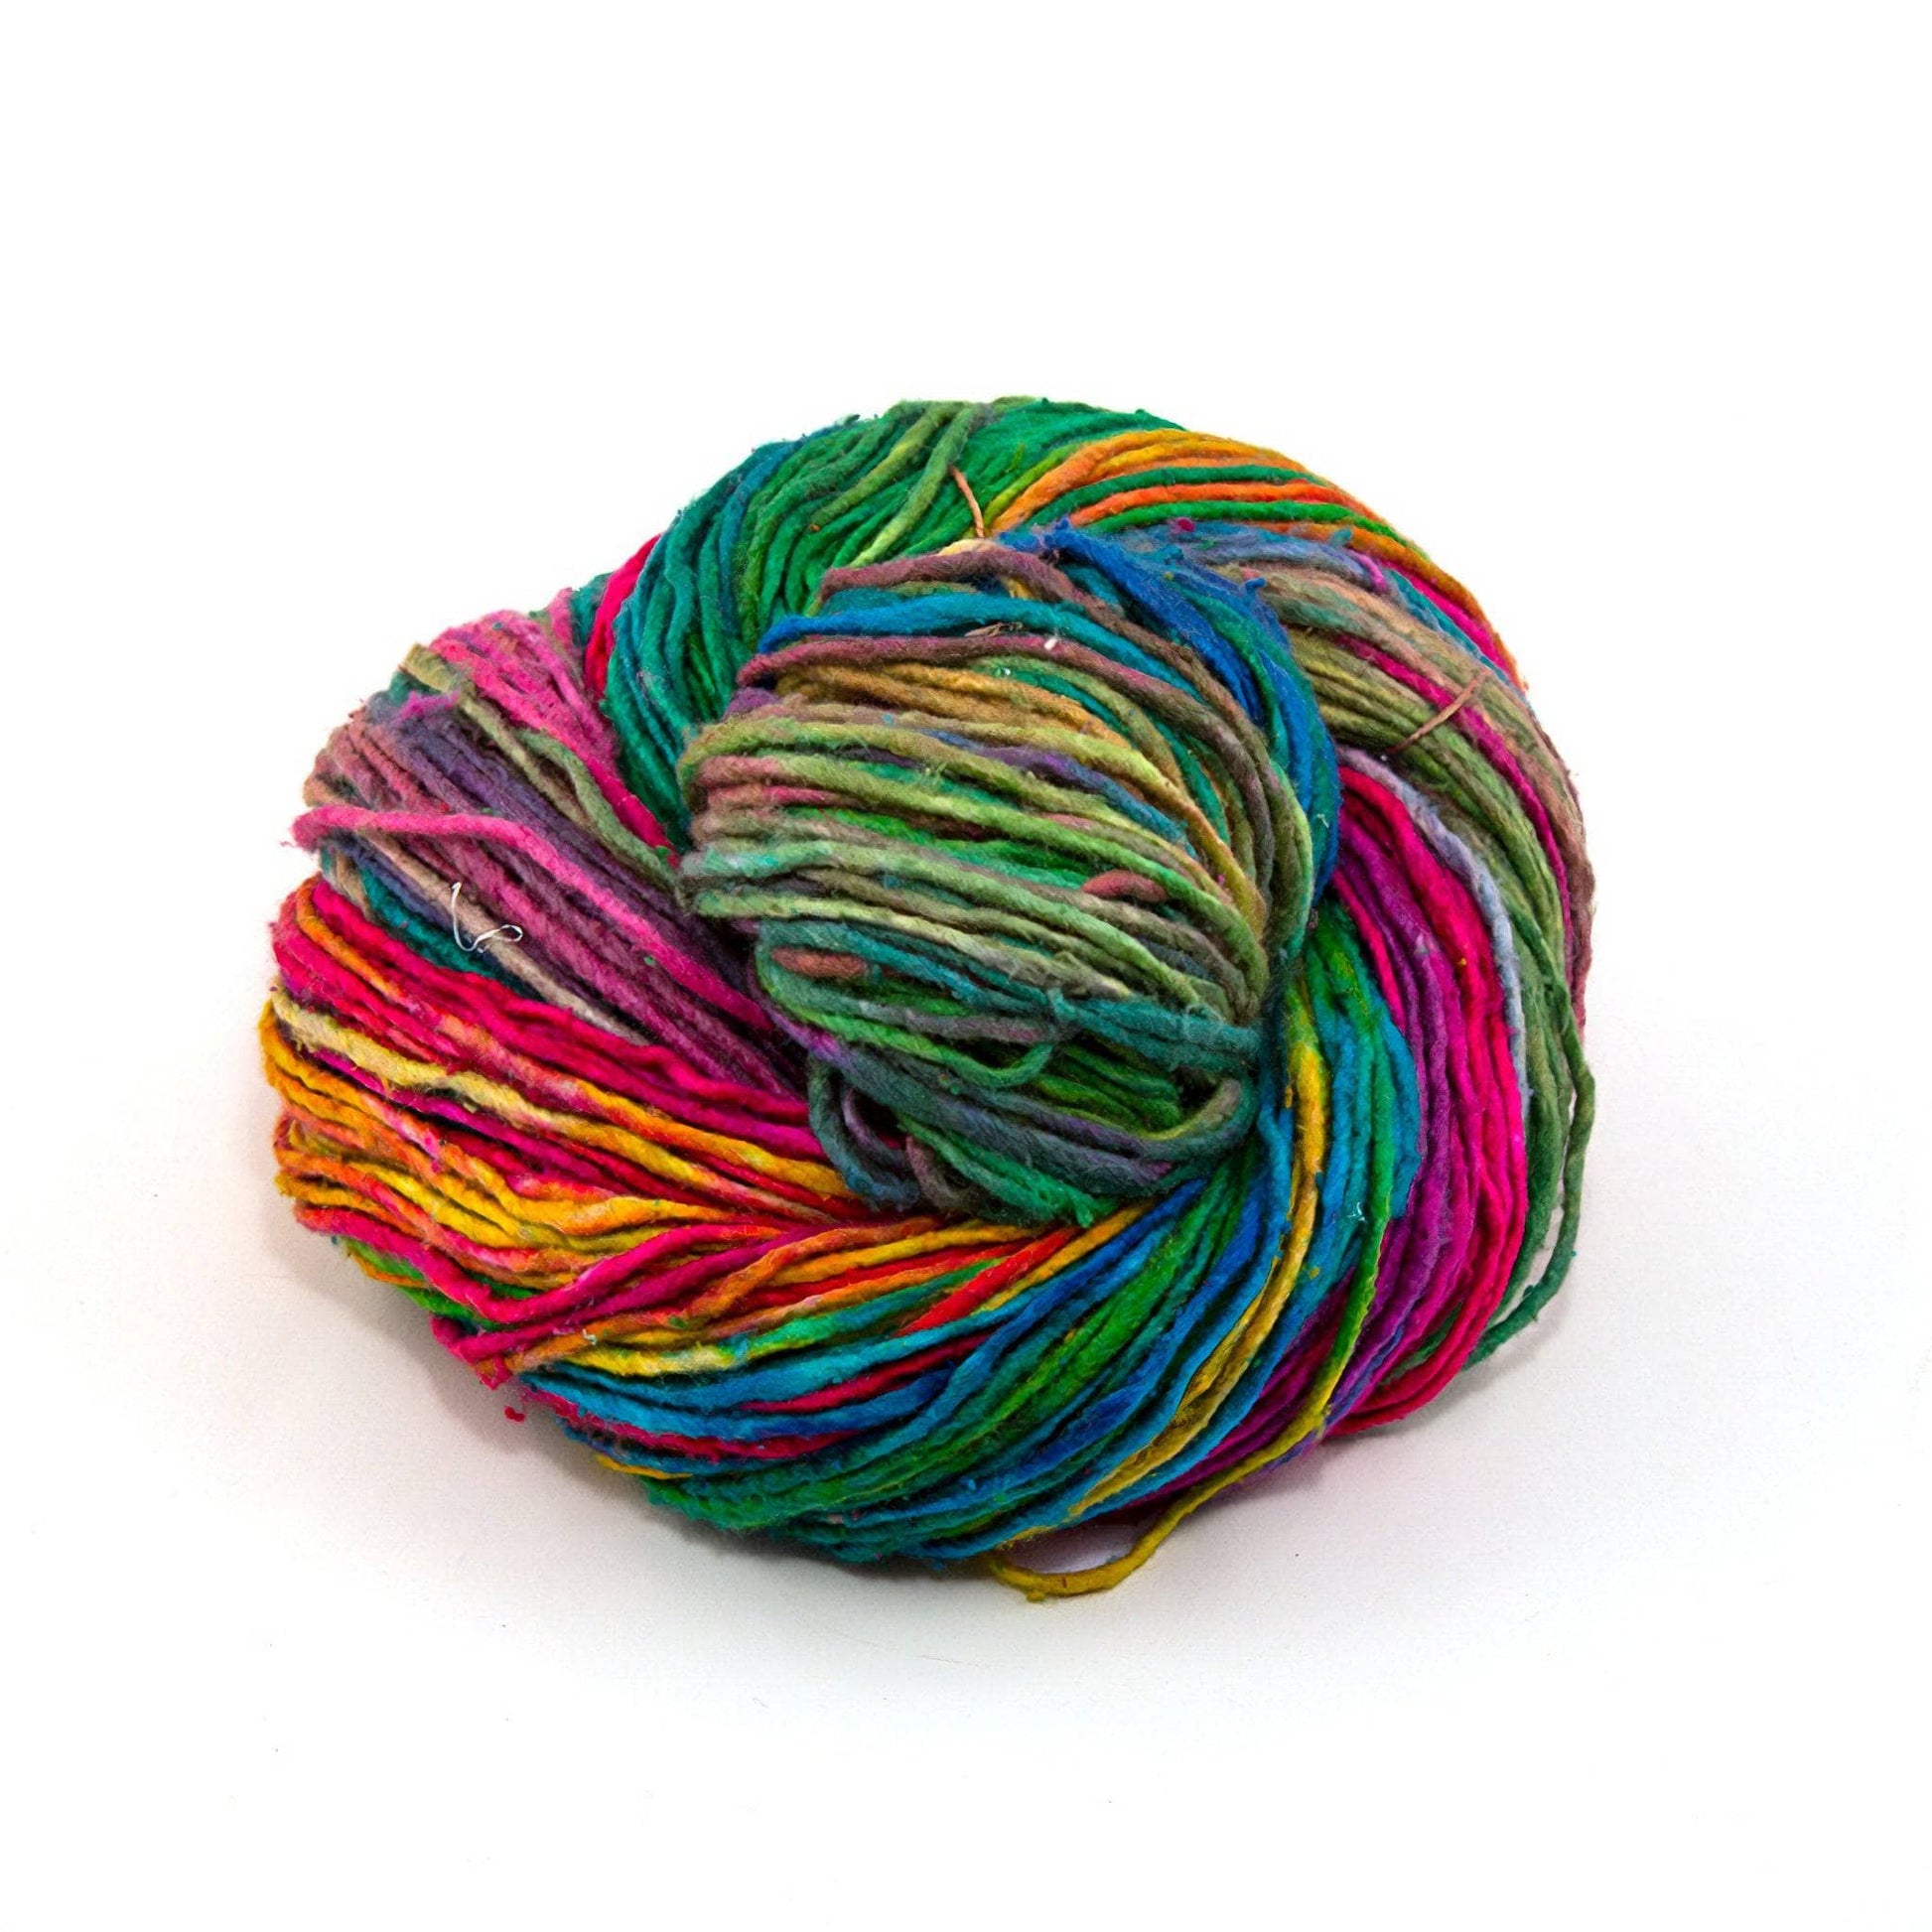 Single skien of worsted weight recycled silk yarn in watercolors (rainbow ombre, deeper rich colors) colorway in front of a white background.